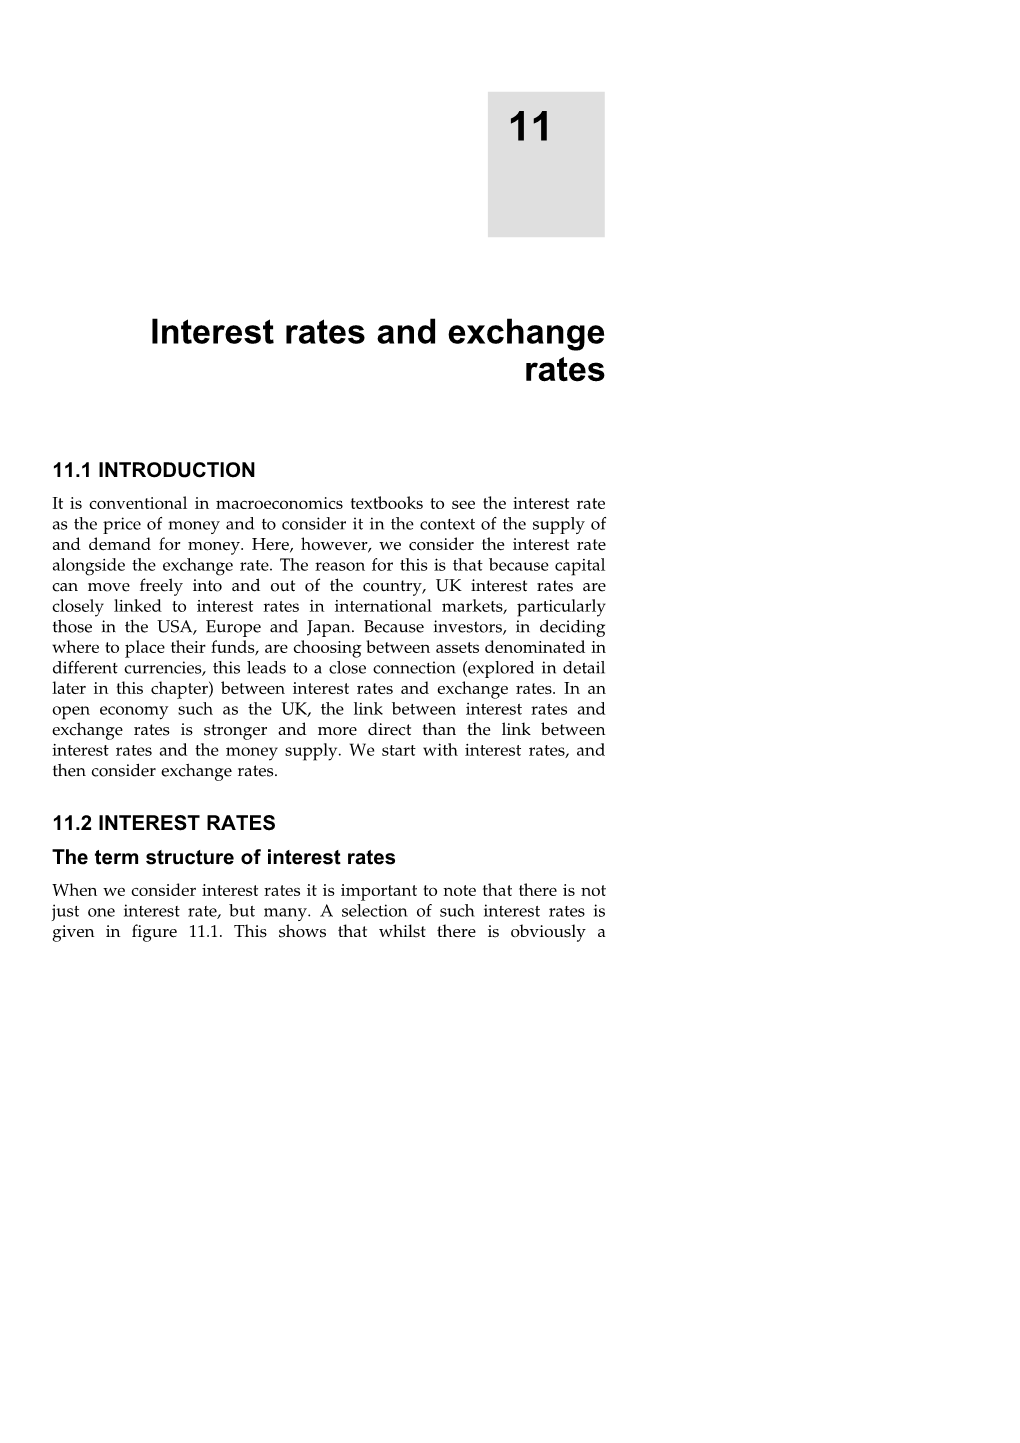 Interest Rates and Exchange Rates